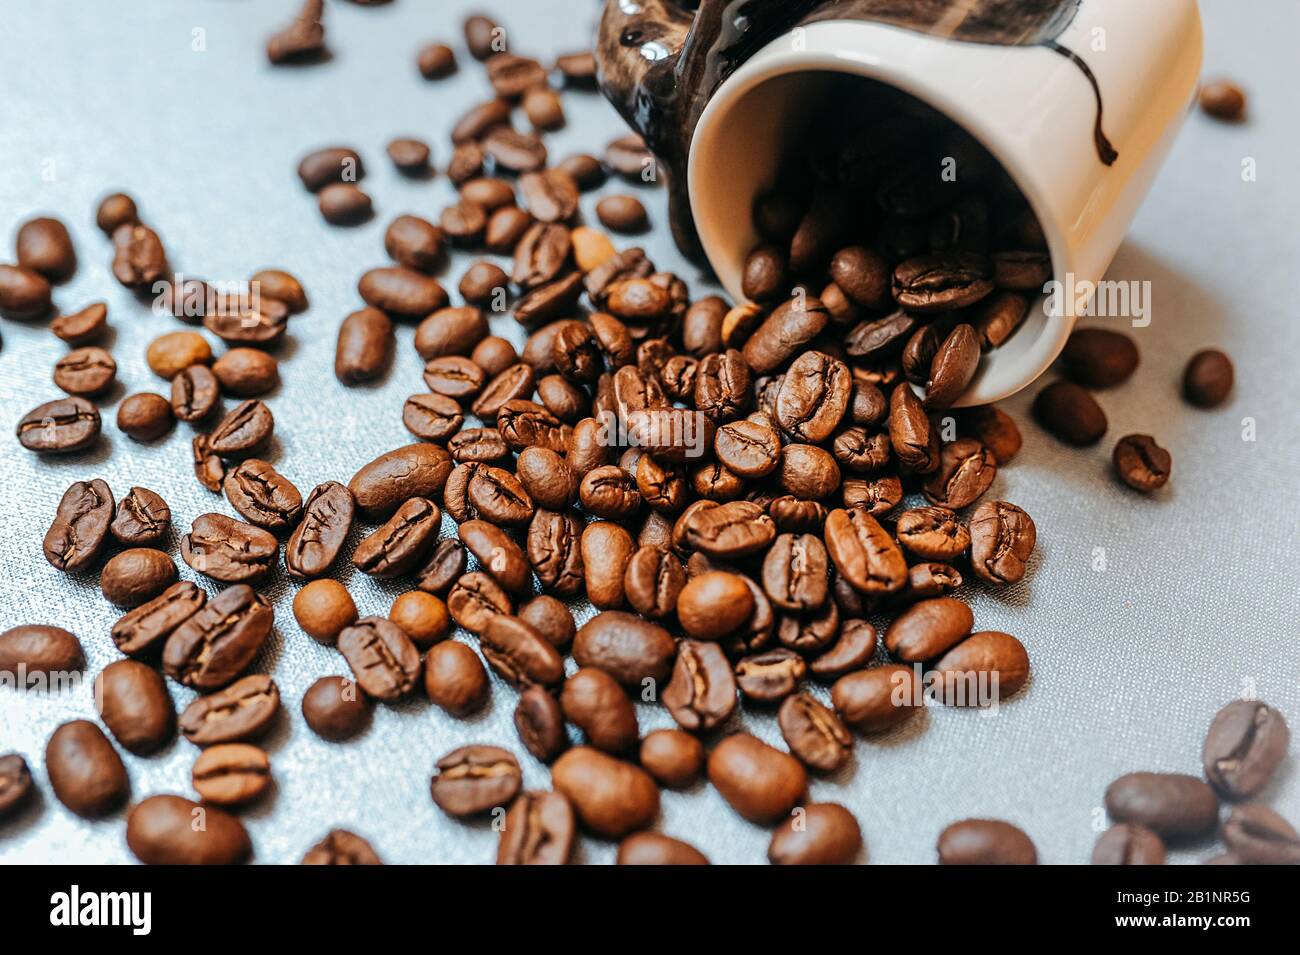 ready-made picture for coffee advertising and ready for publication, a large number of coffee roasted beans are scattered around a white mug full of b Stock Photo